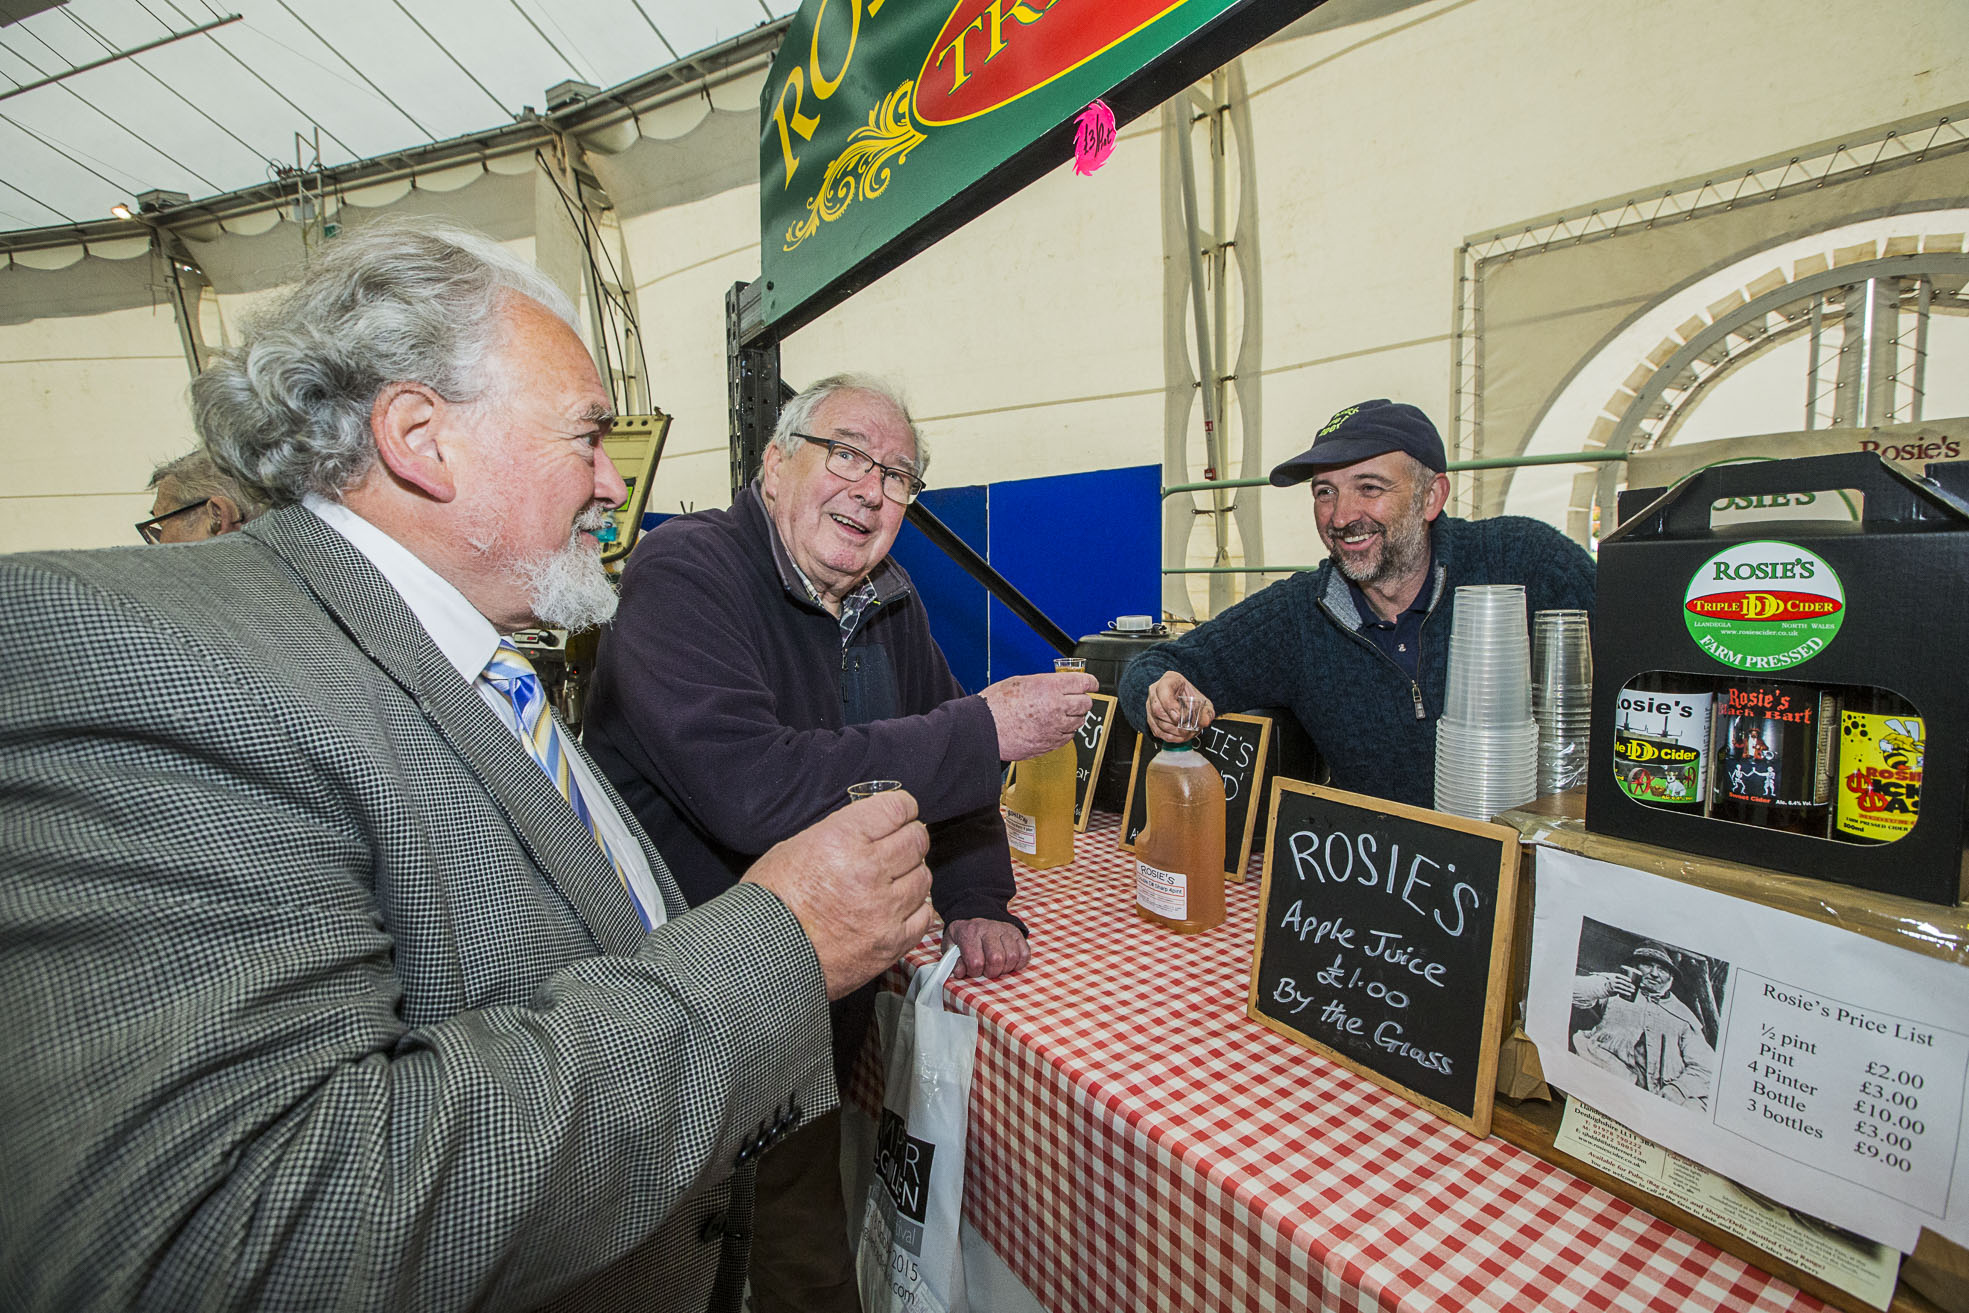 Festival crowns golden age of artisan Welsh produce says tourism supremo